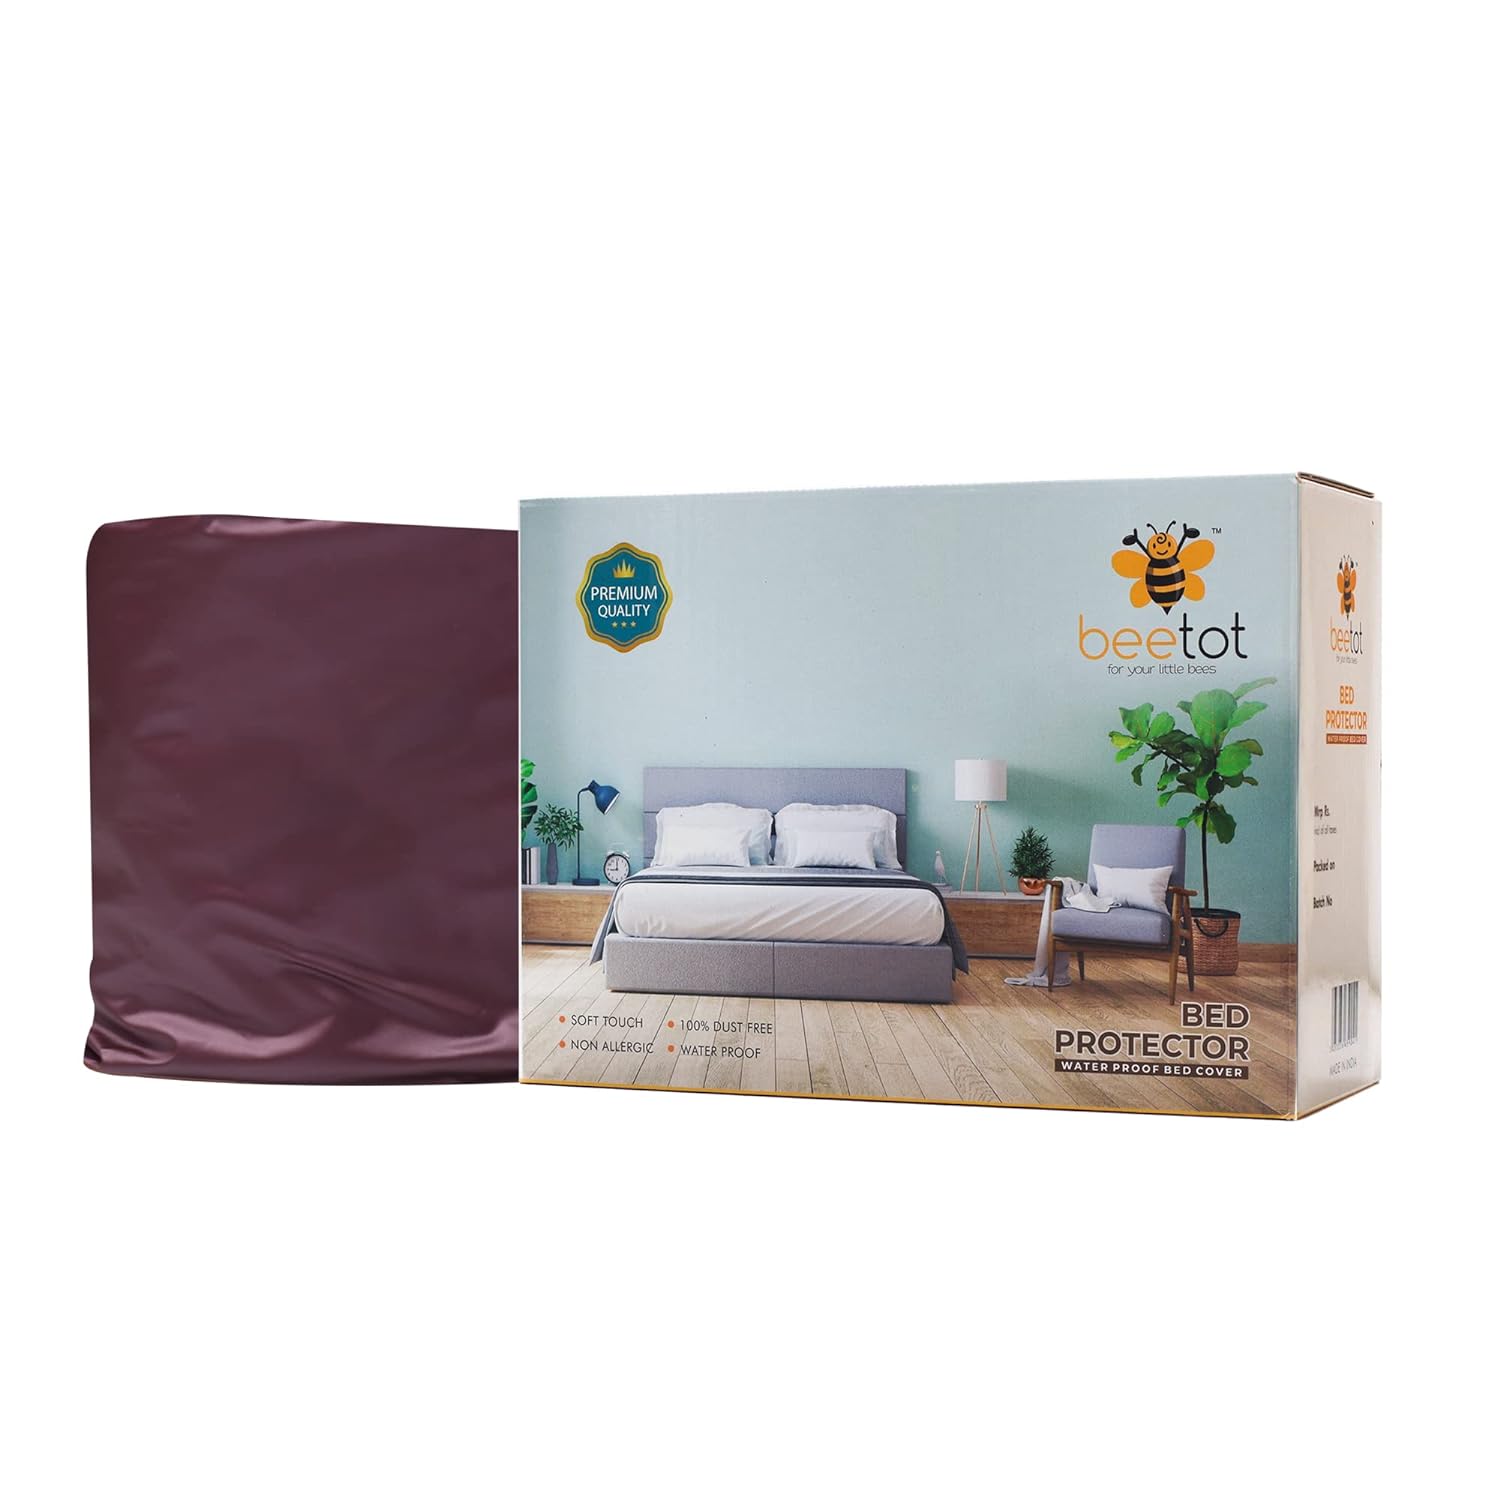 PVC Water Proof and Dust Proof Double Bed Cover, Mattress Protector, Non-Toxic Bed Protector, Mattress Cover (Maroon)